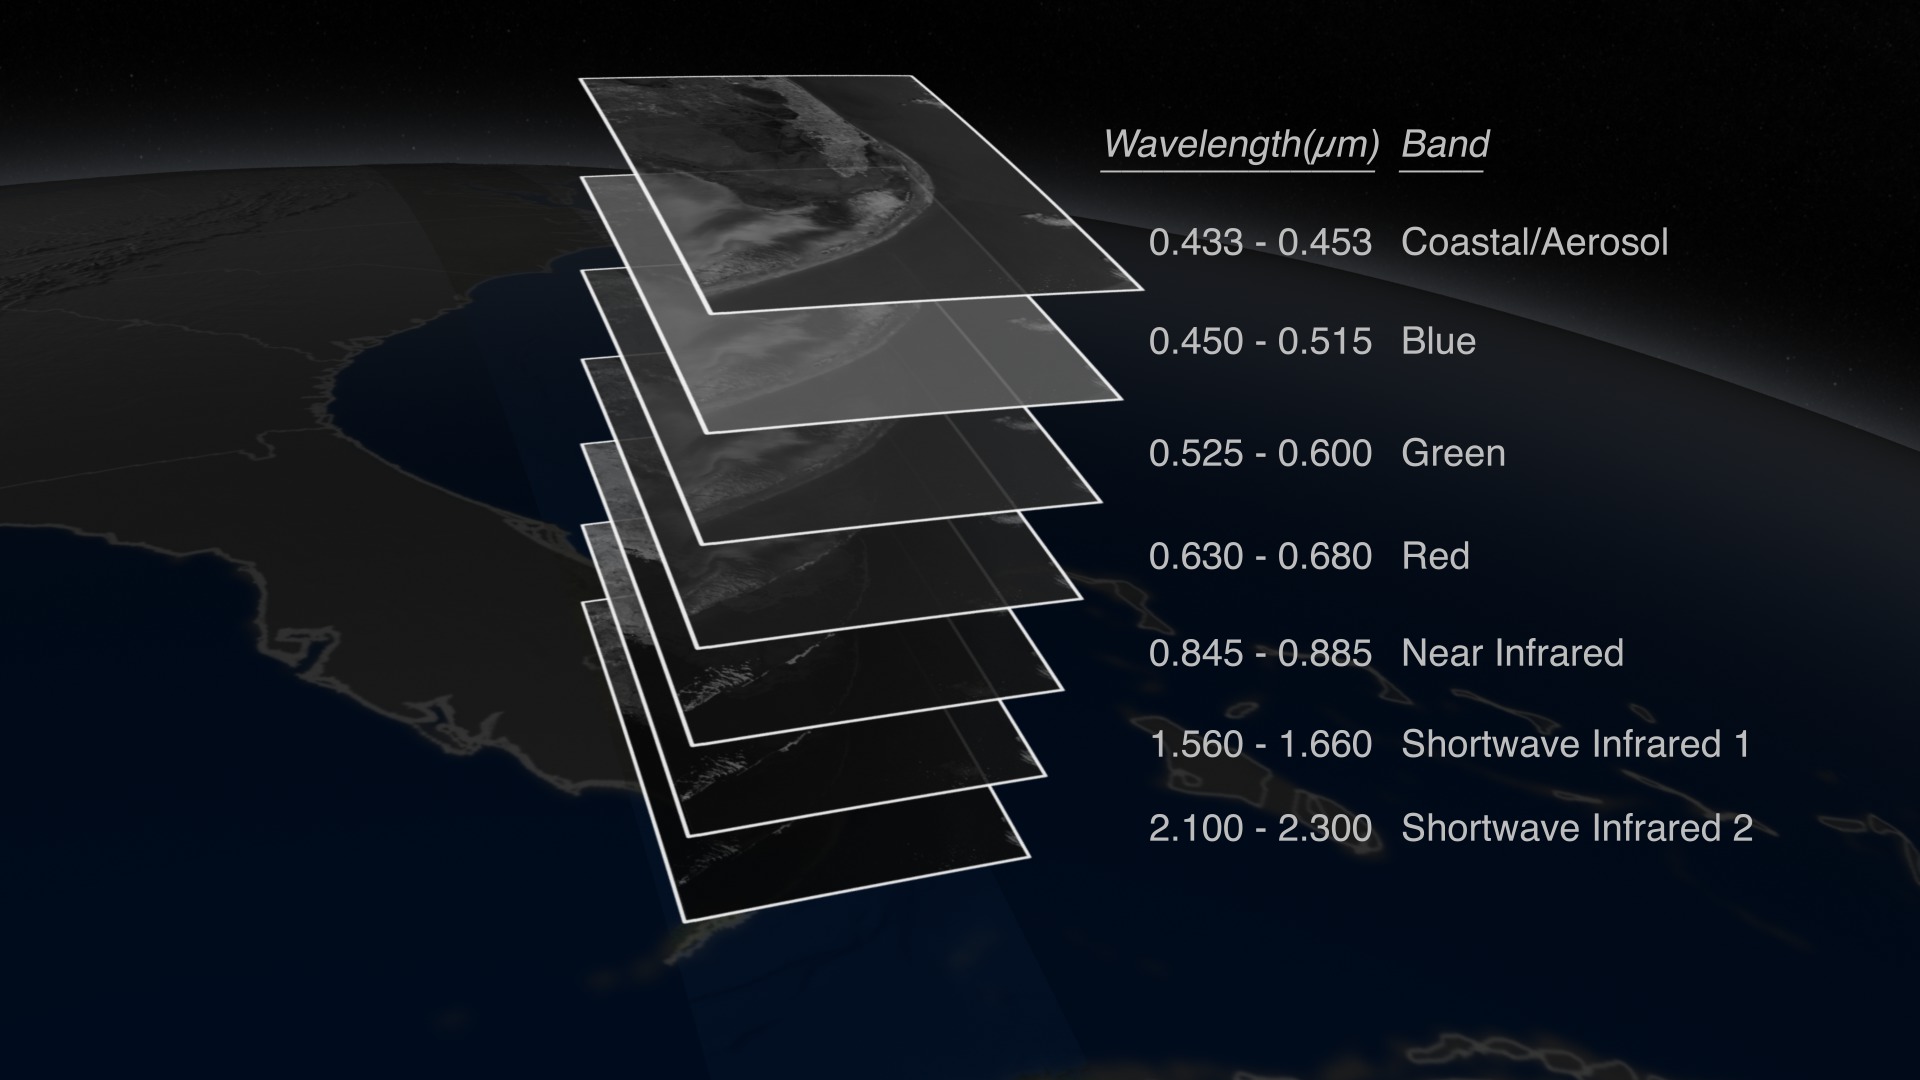 Animation showing how different LDCM bands can be combined to obtain different information over the Florida Everglades.